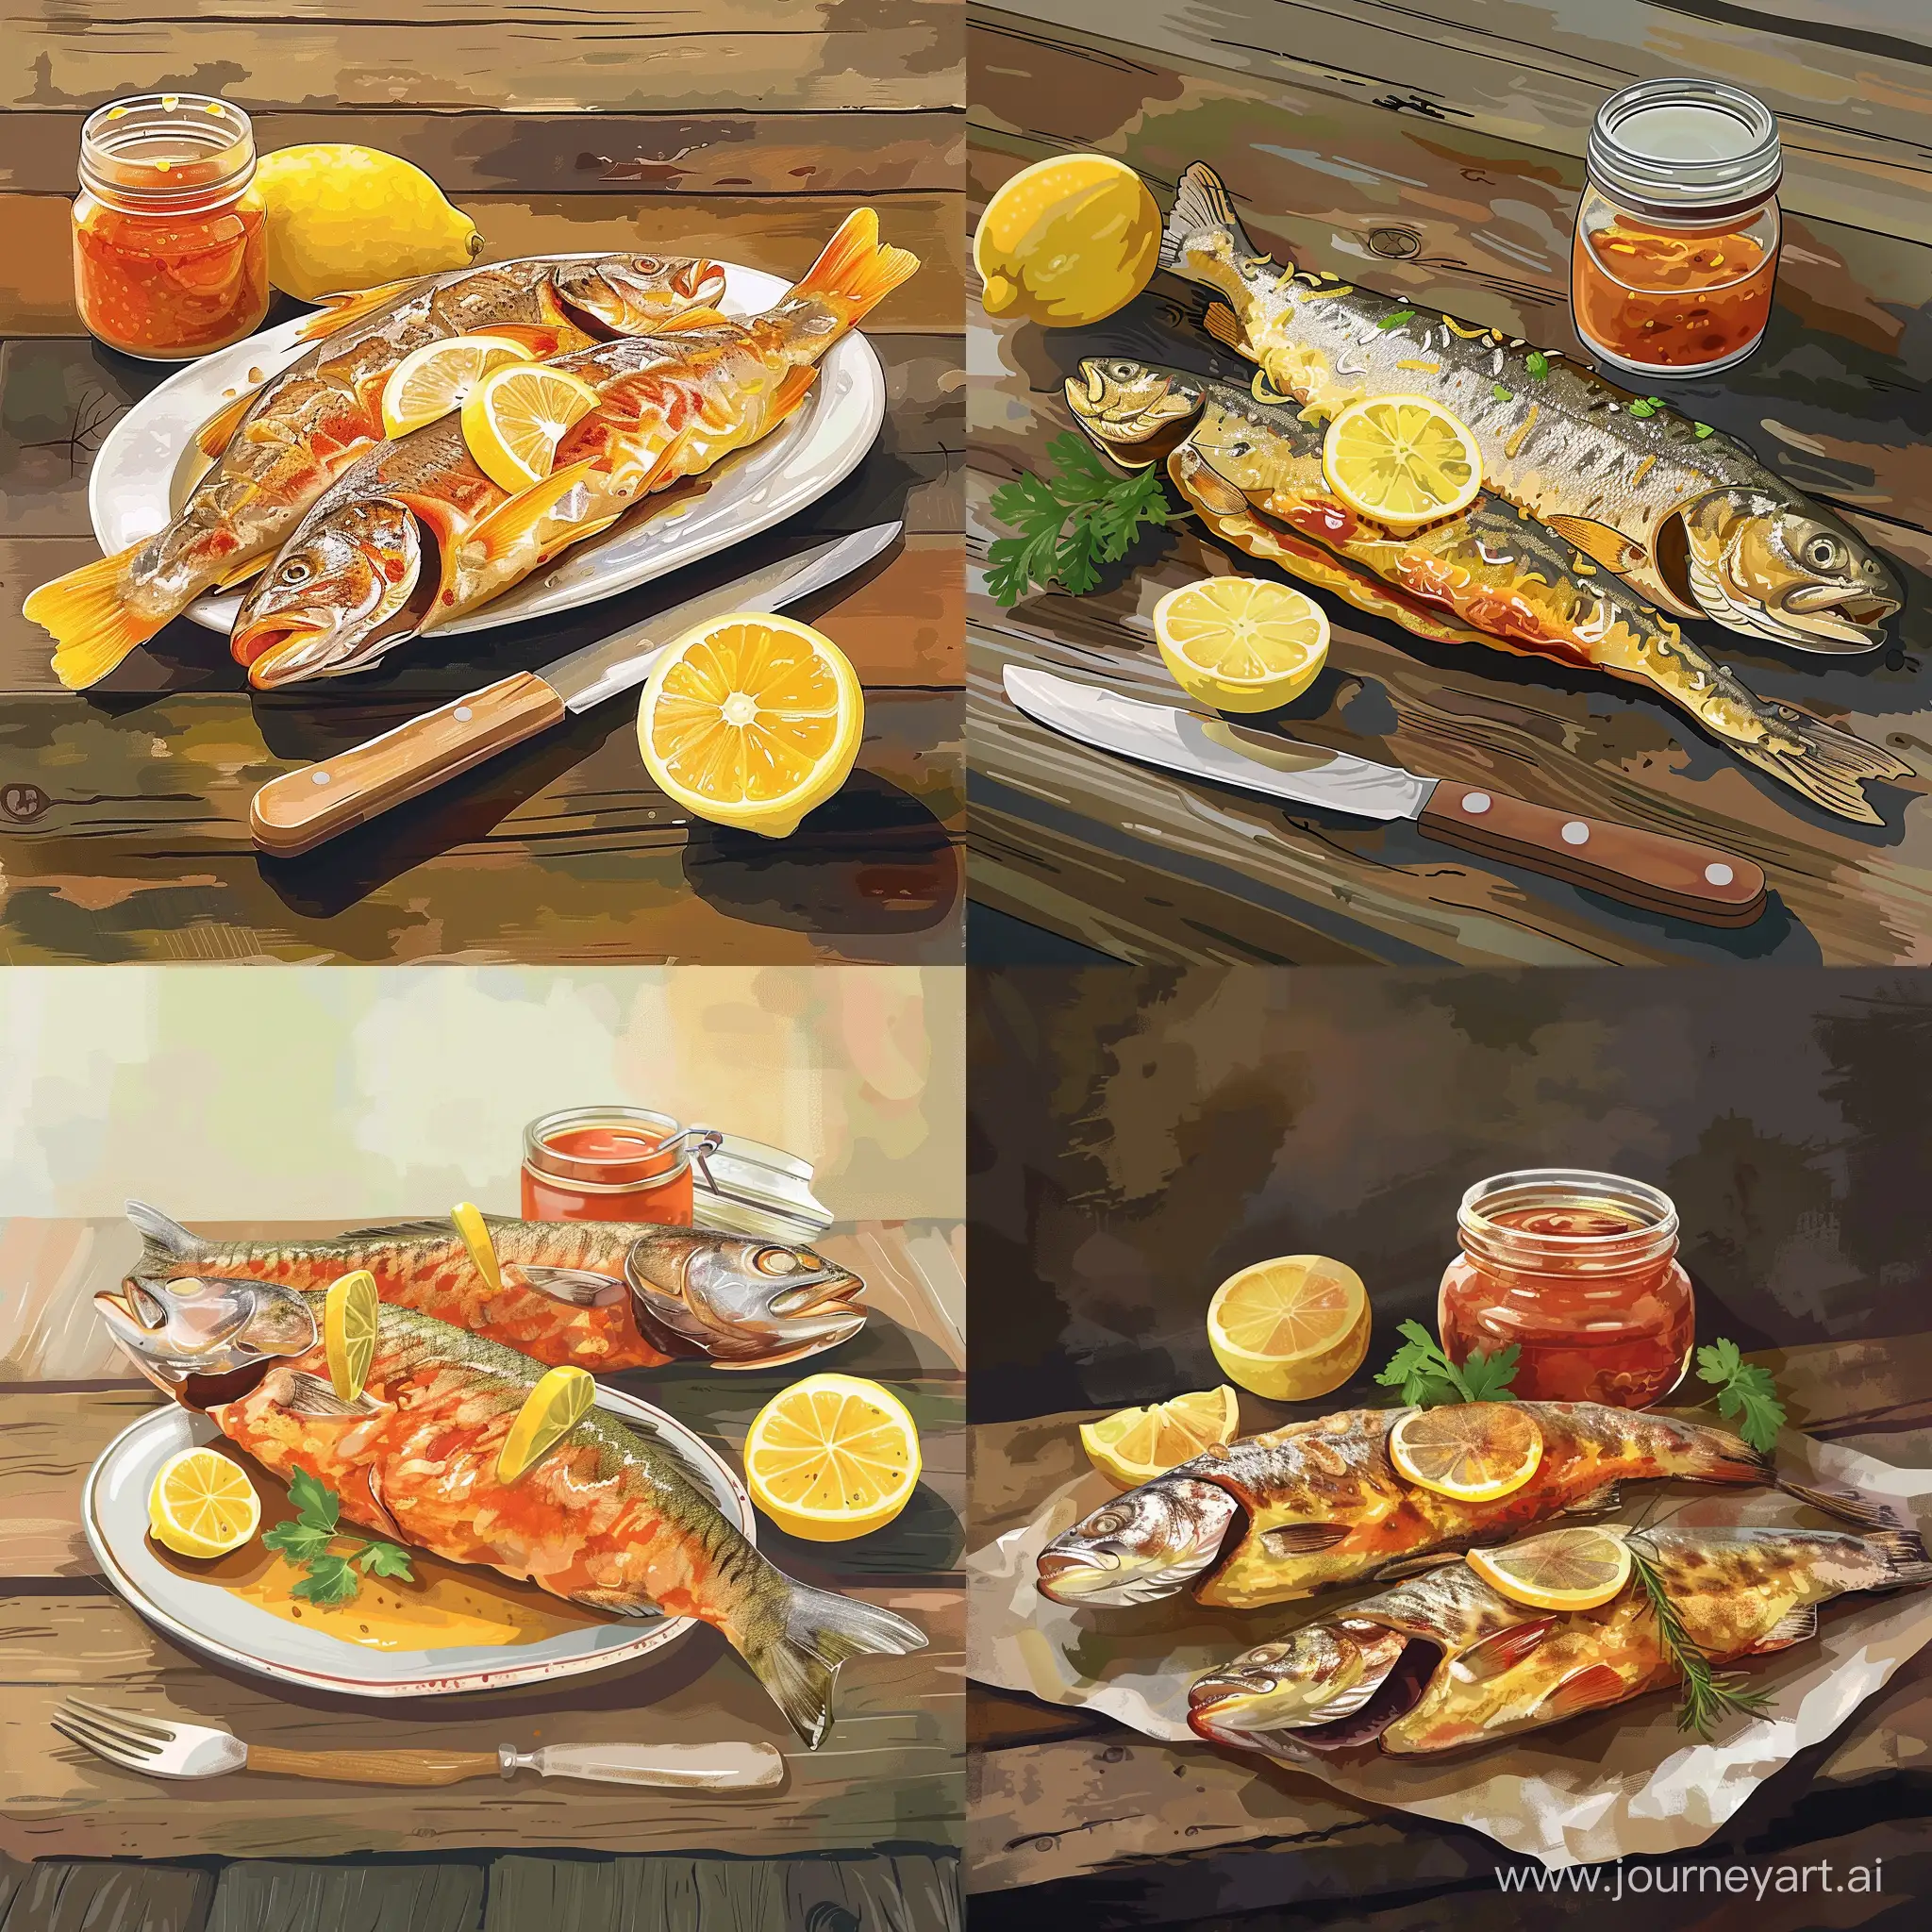 Rustic-Baked-Fish-with-Lemon-Garnish-Illustration-on-Wooden-Table